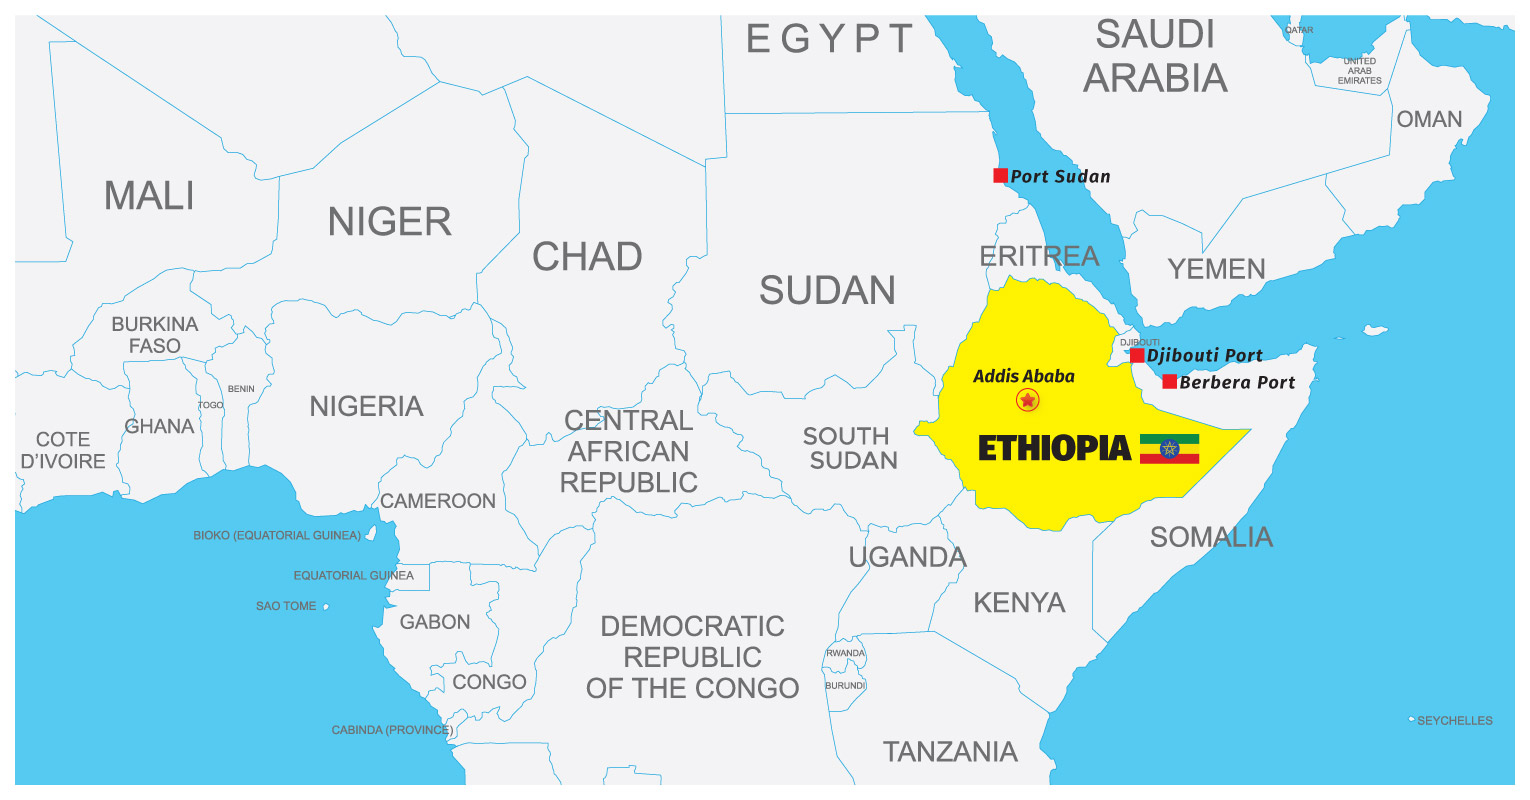 Hyrdo, Solar and Geotermal Projects in Ethiopia